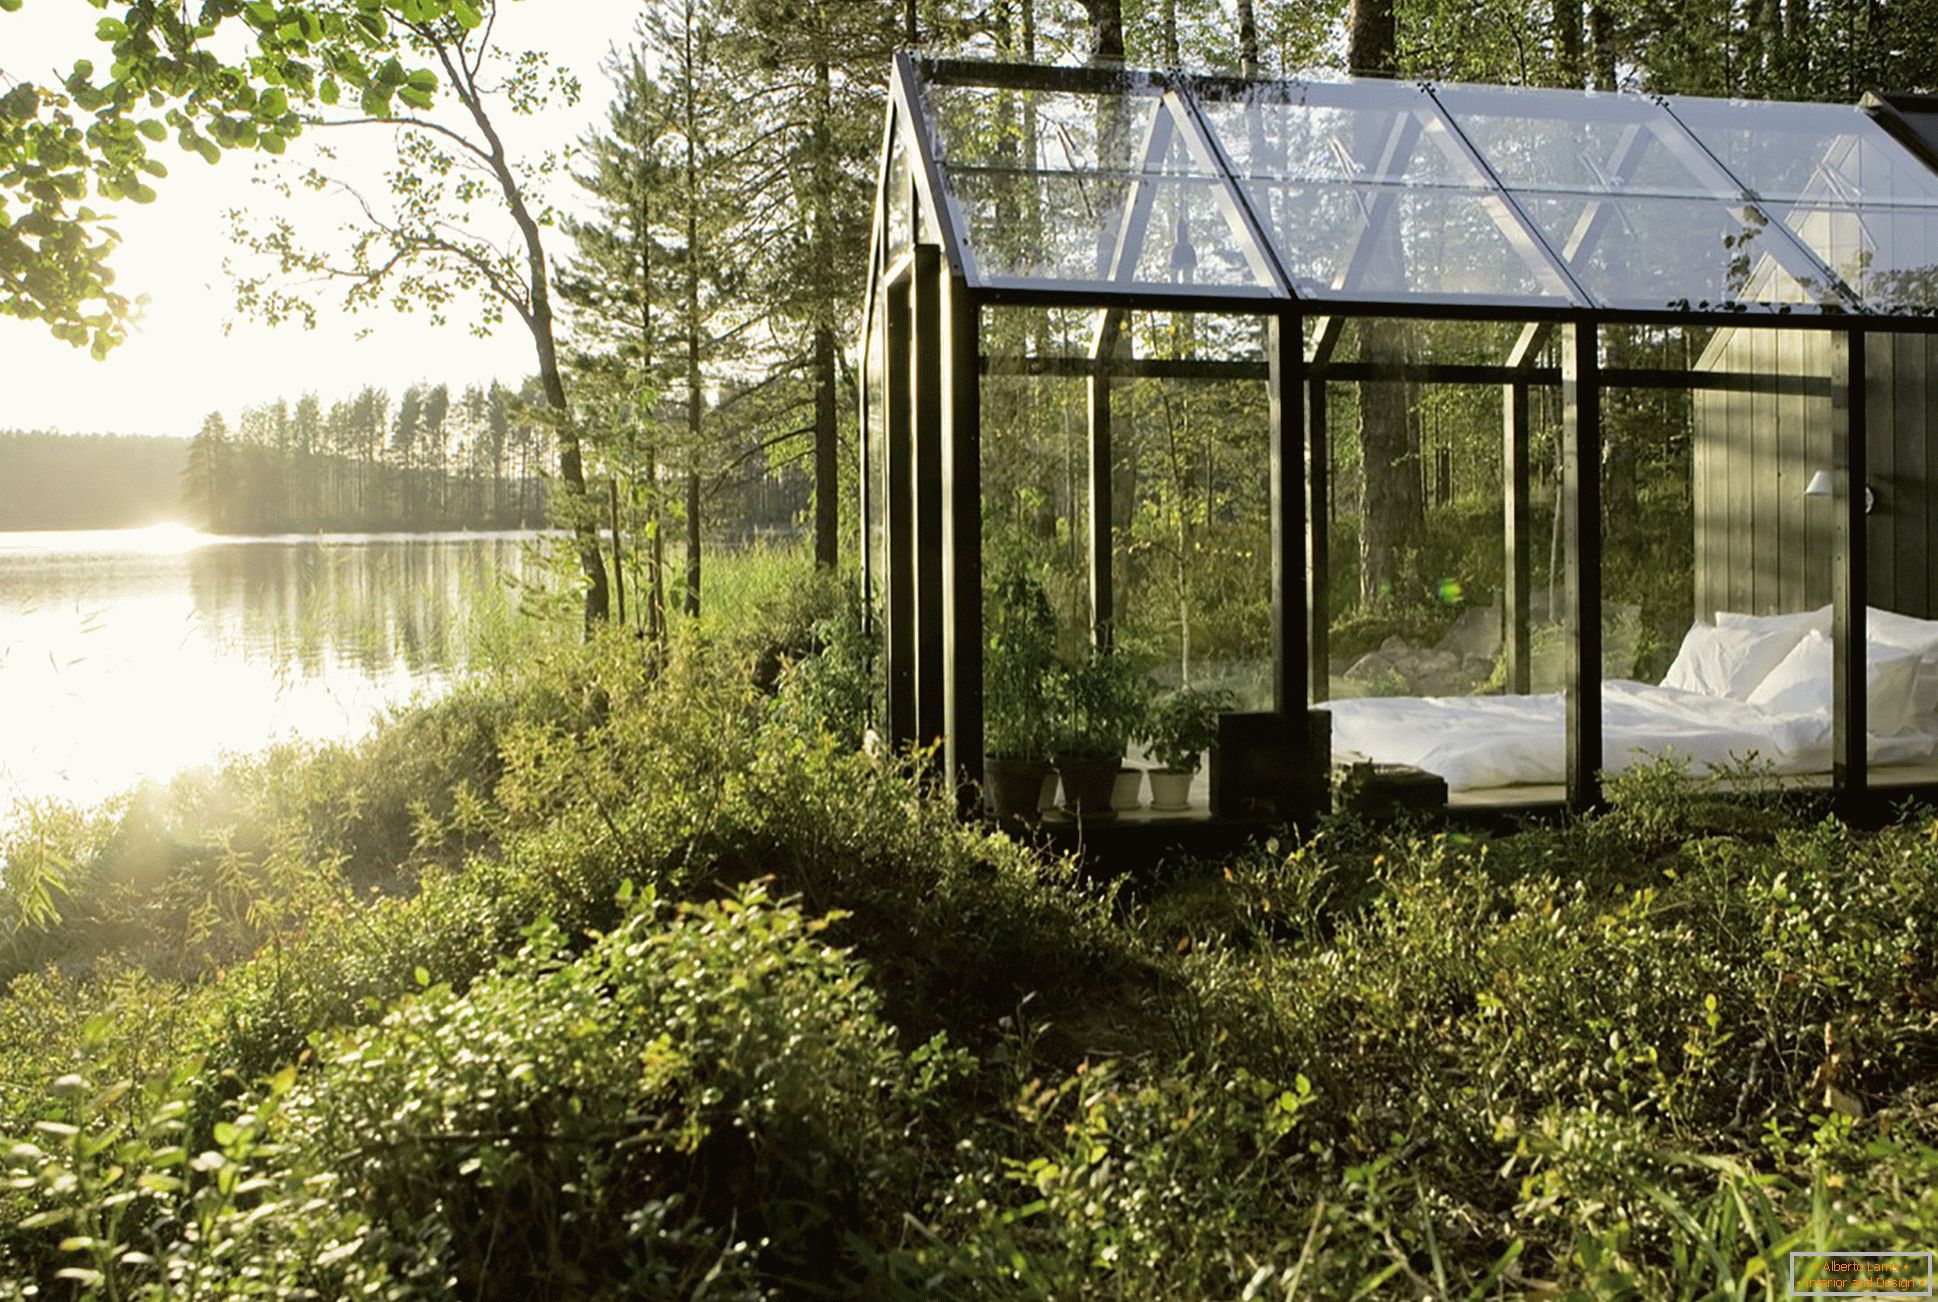 Design of a greenhouse in the middle of the forest